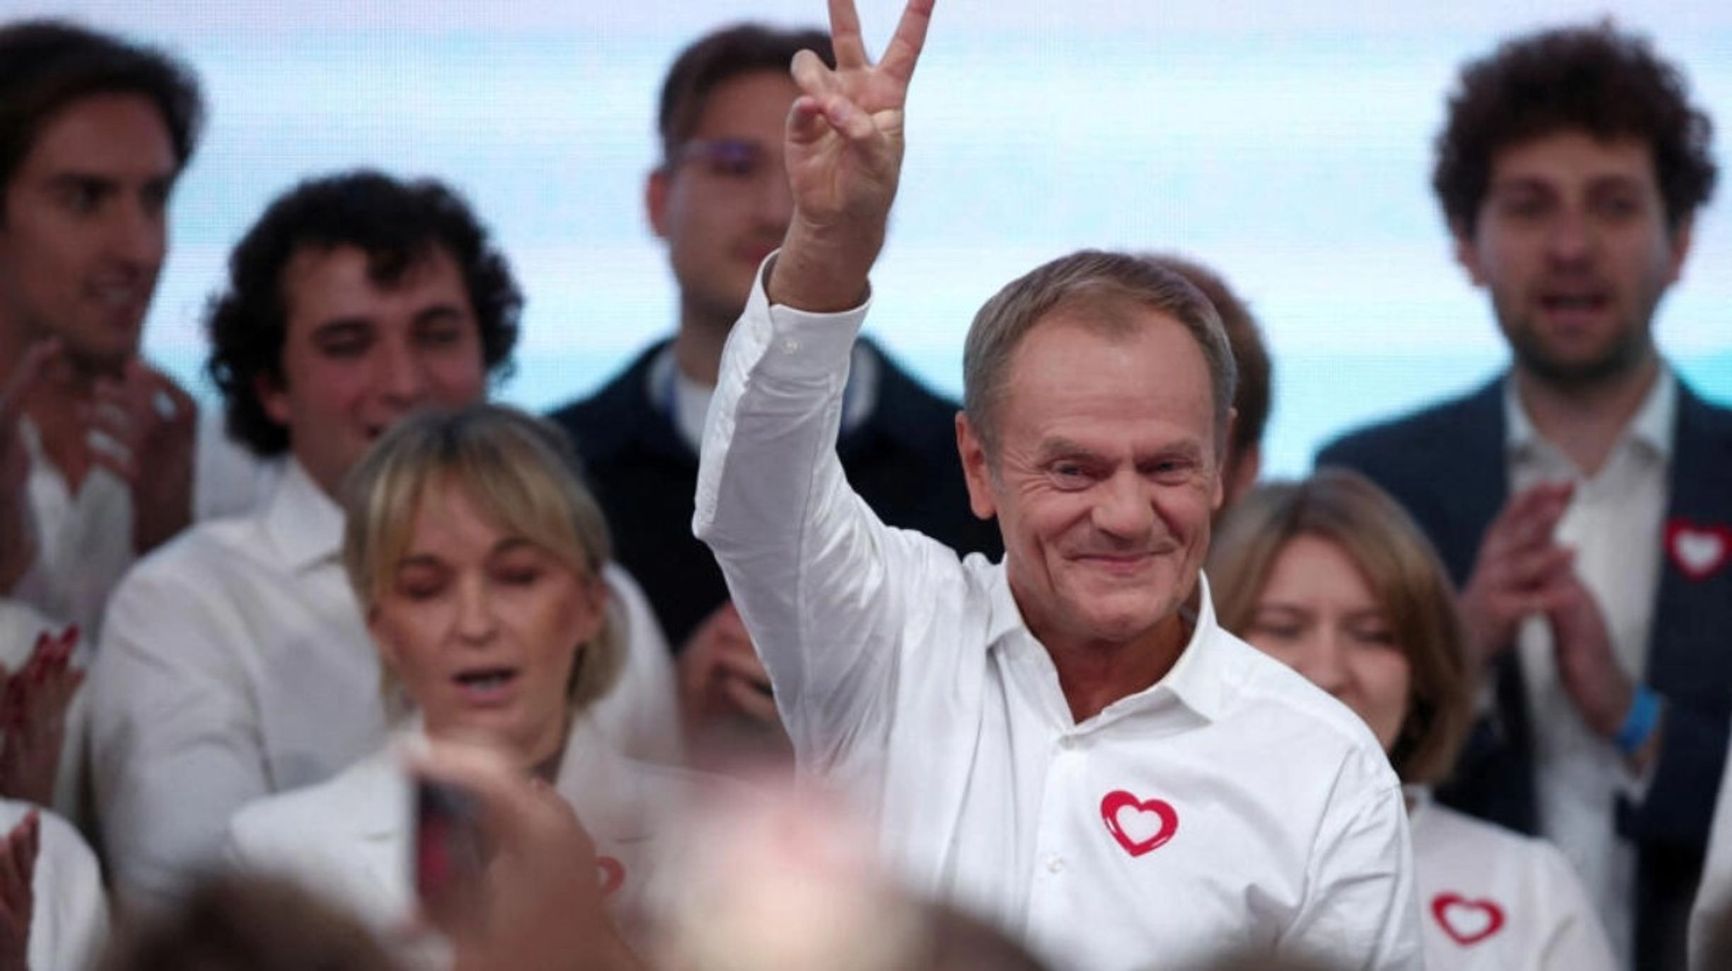 Leader of the opposition Civic Coalition, Donald Tusk, Declares Victory in the Elections 